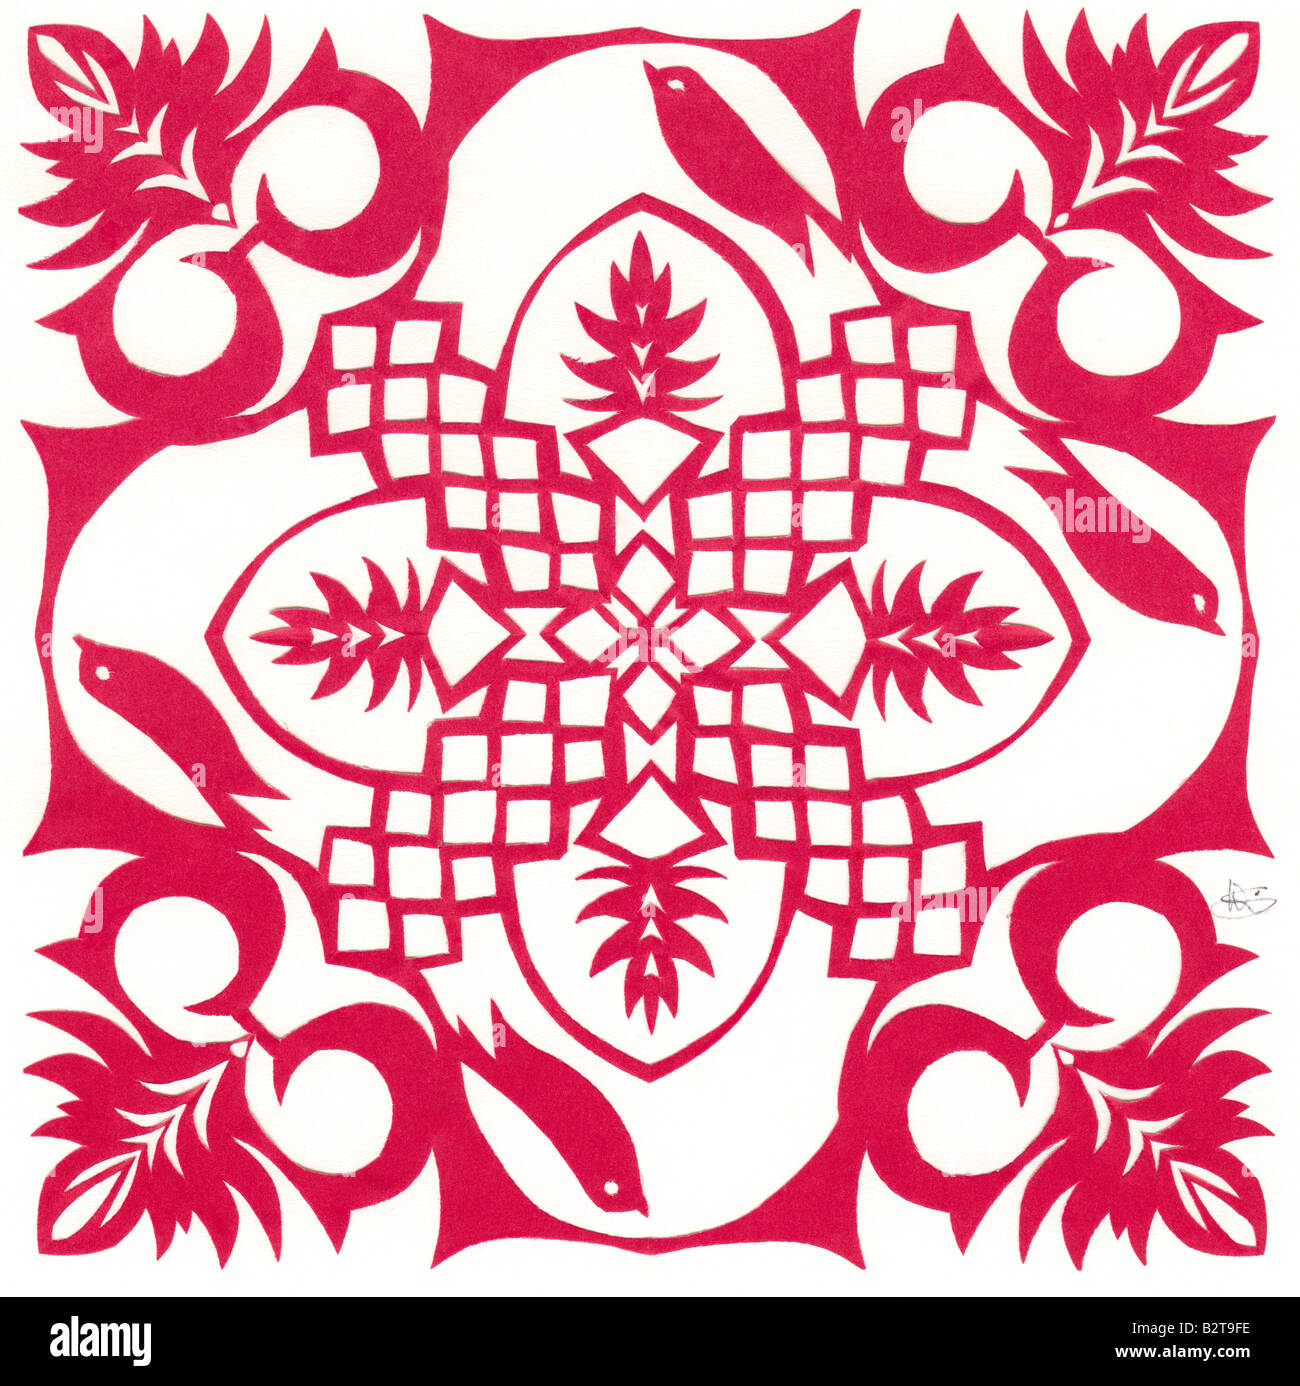 Contemporary paper cutting with symmetrical floral design by Miss Wanda Skowron from Warszawa Poland 2008 Stock Photo